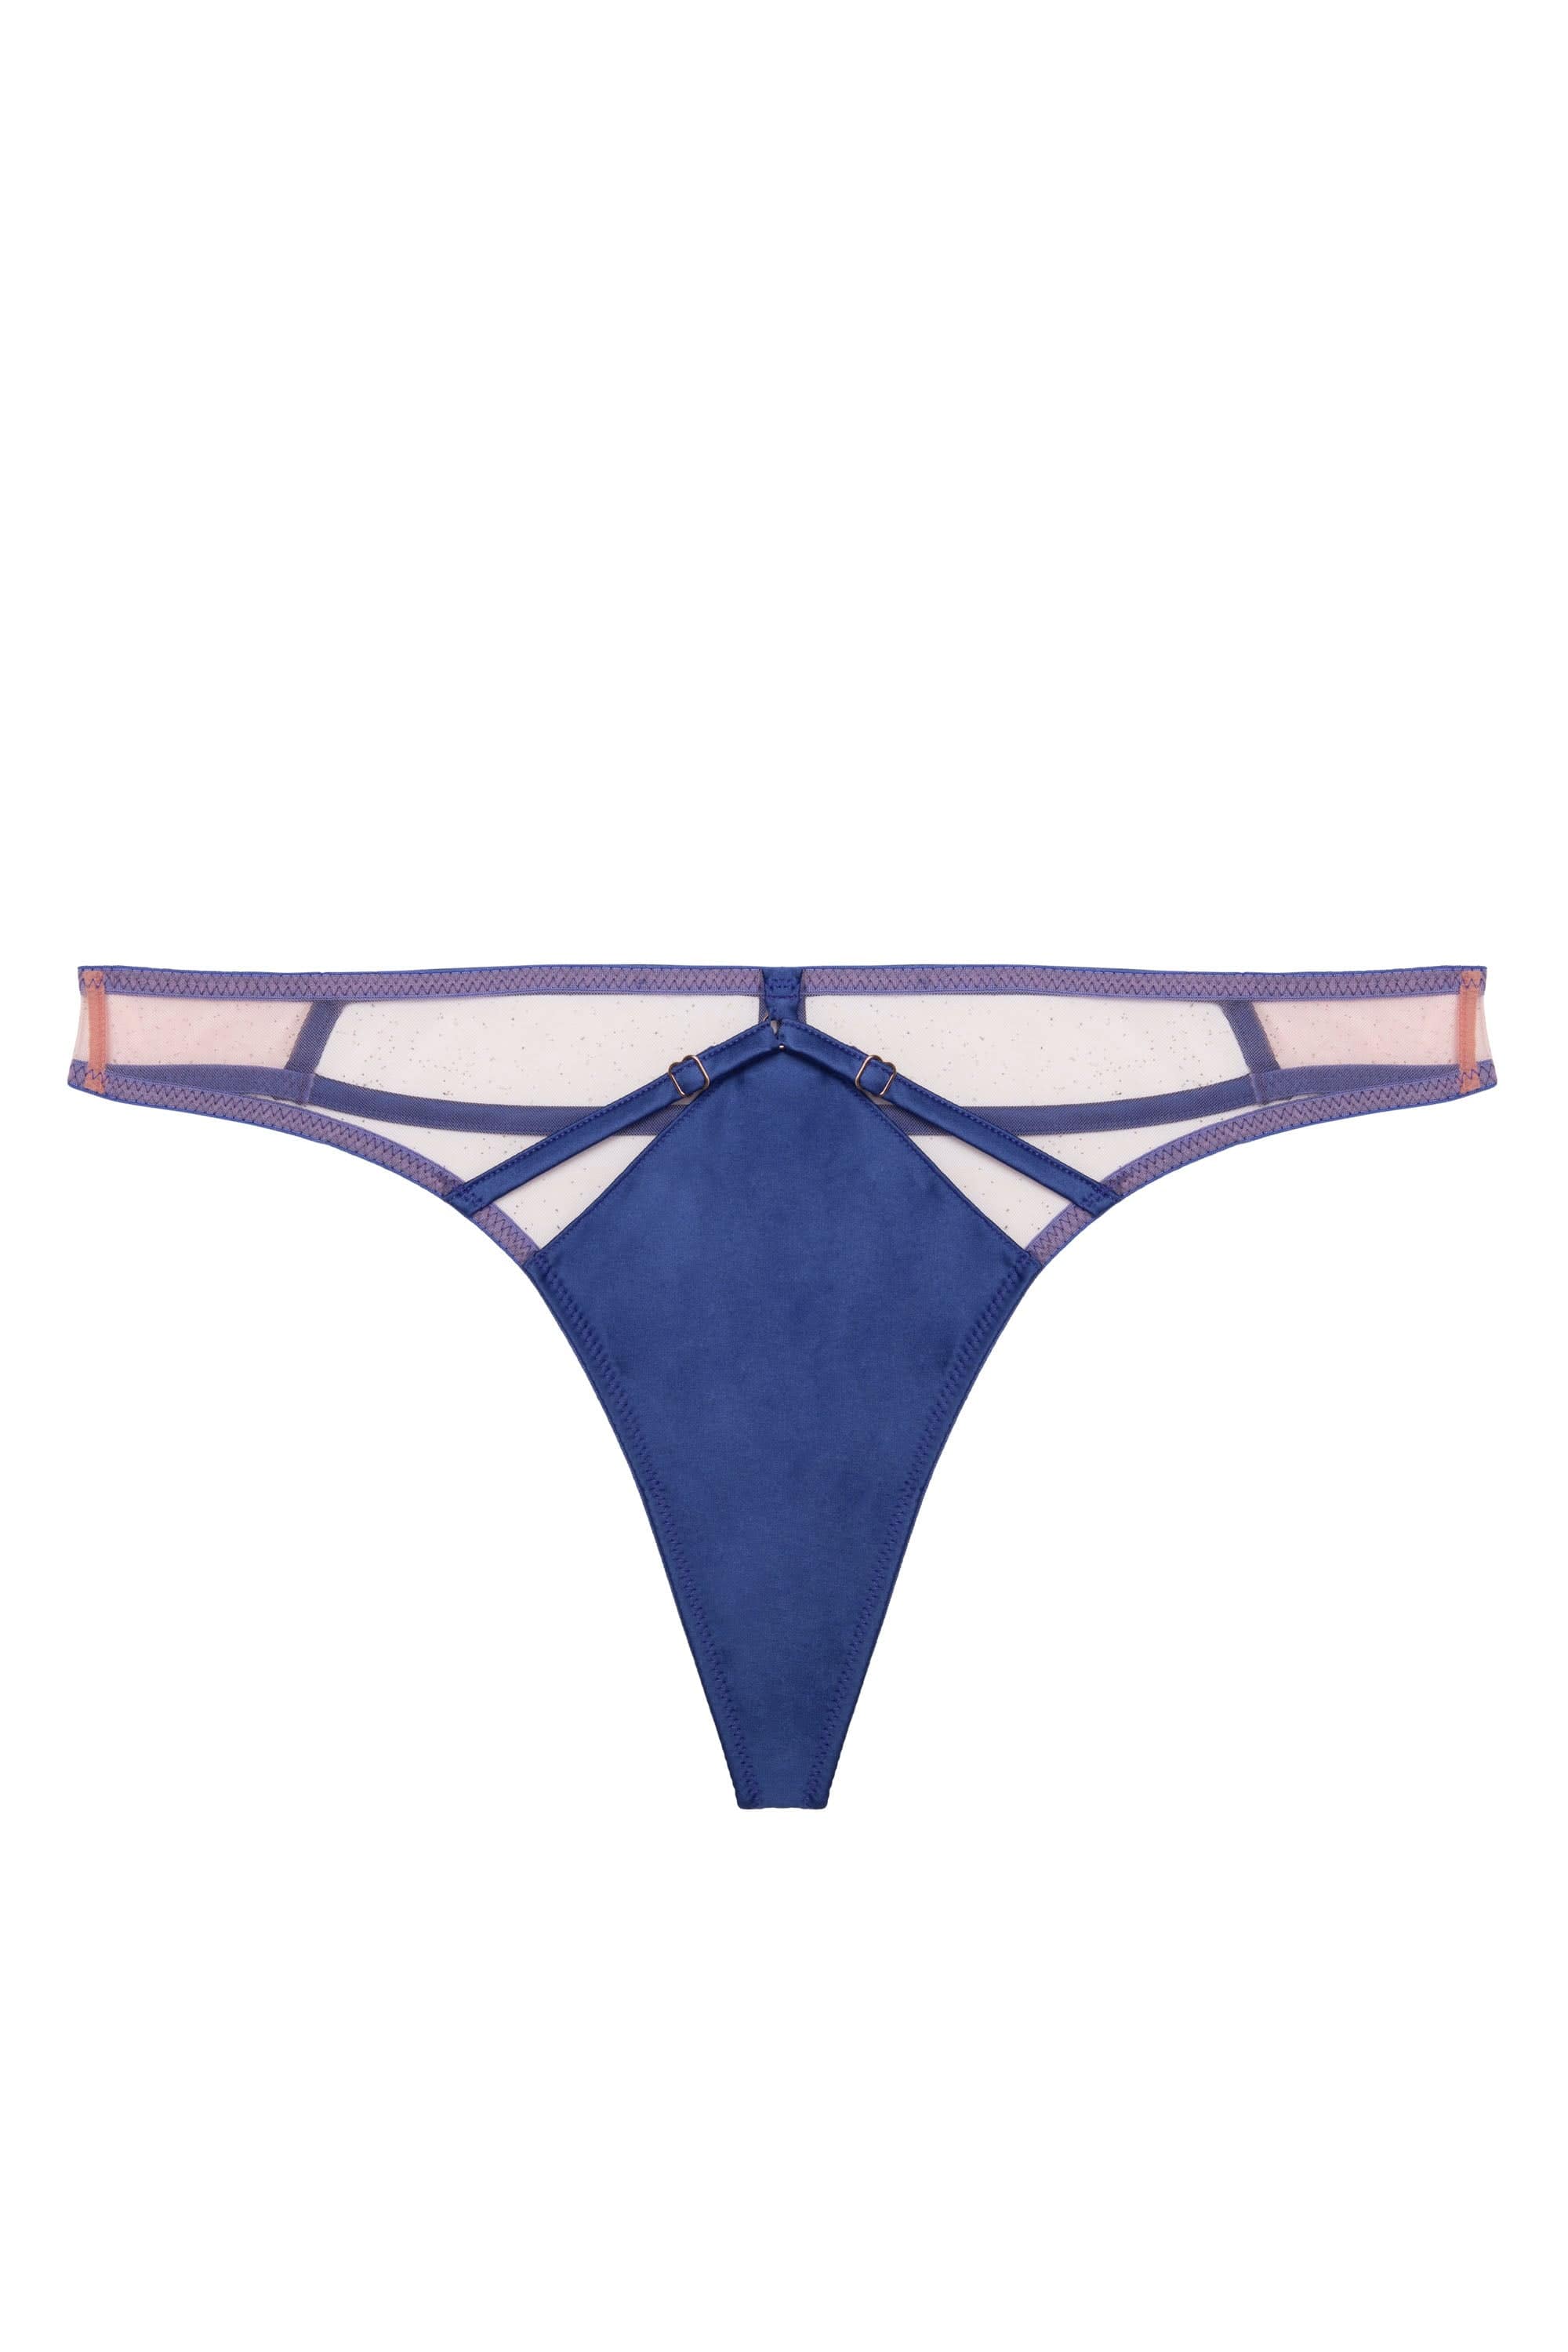 Cobalt blue cage thong with straps